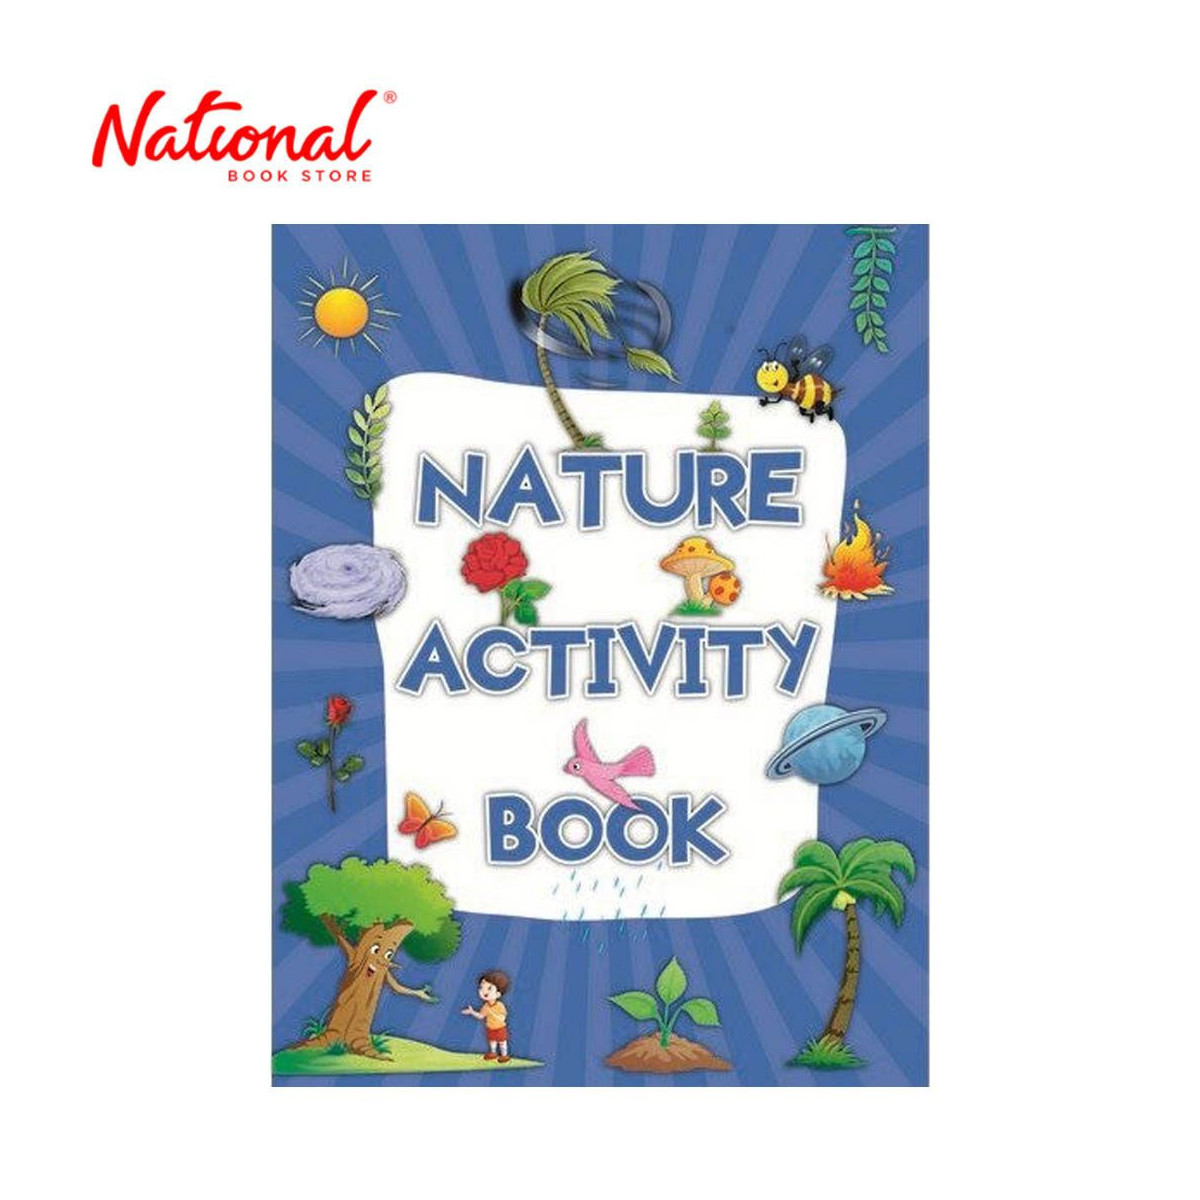 Nature Activity Book - Trade Paperback - Workbook for Kids